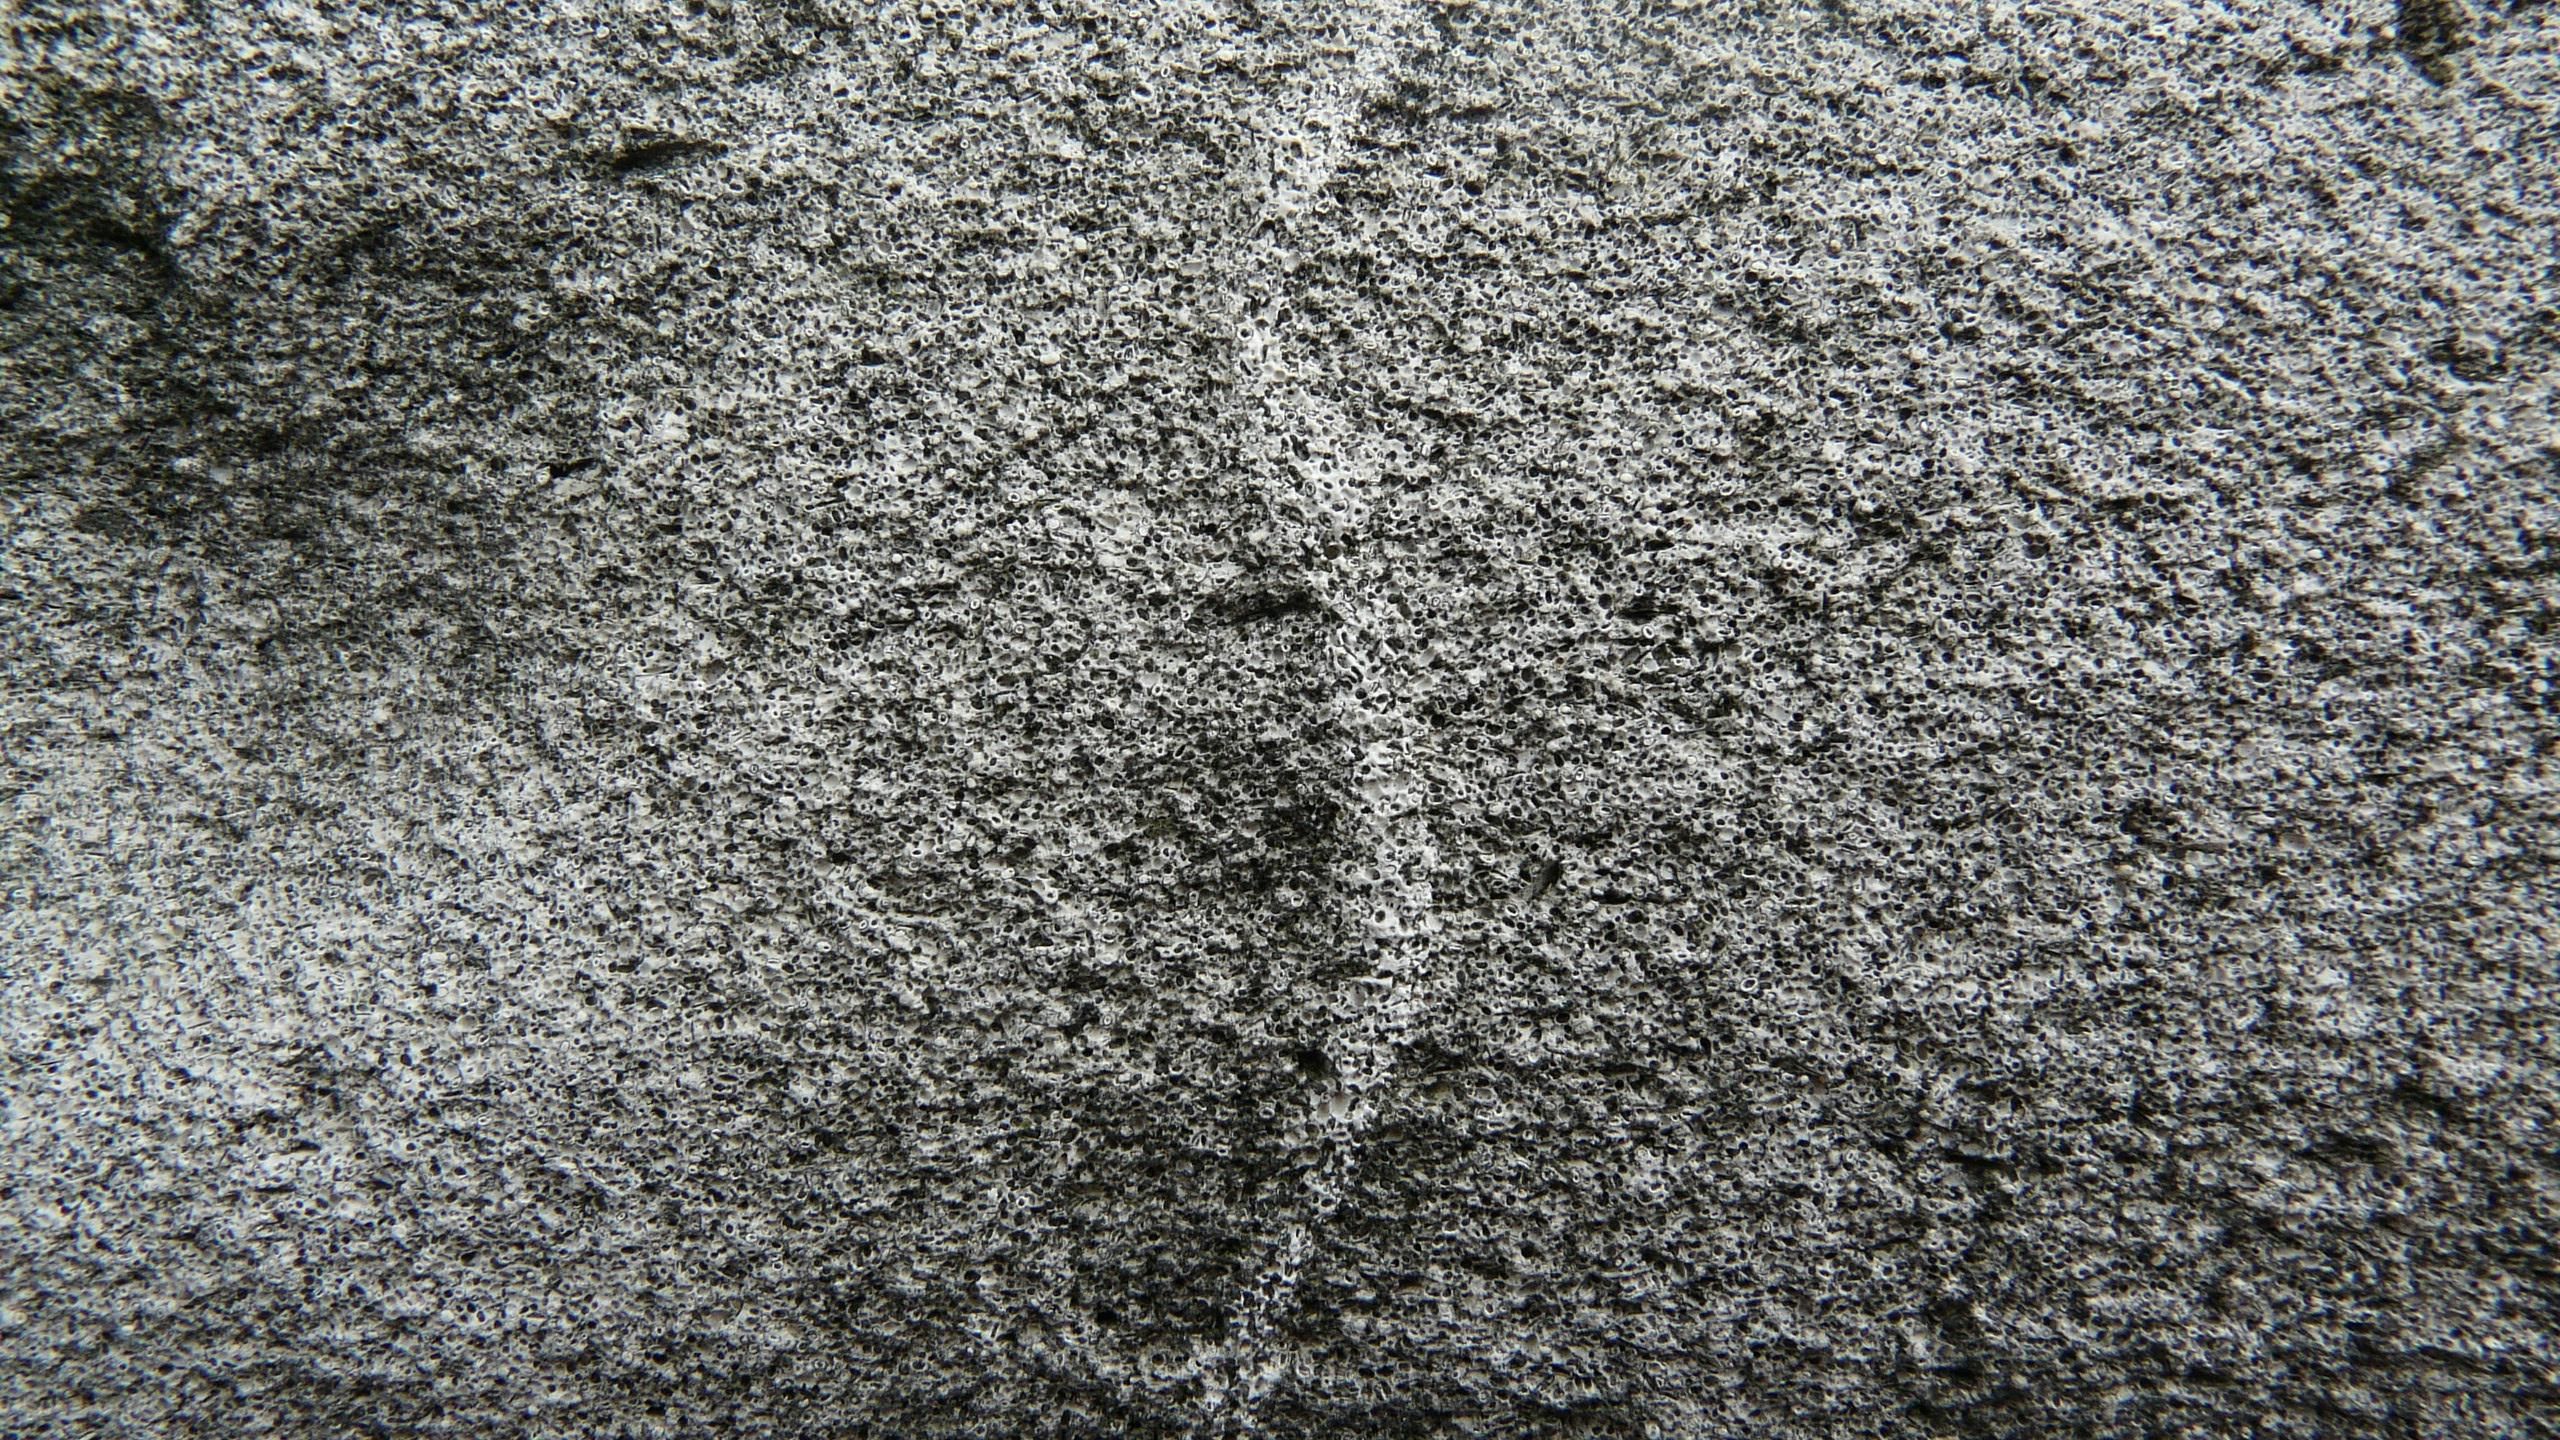 File:Rock high resolution texture.jpg - Wikimedia Commons